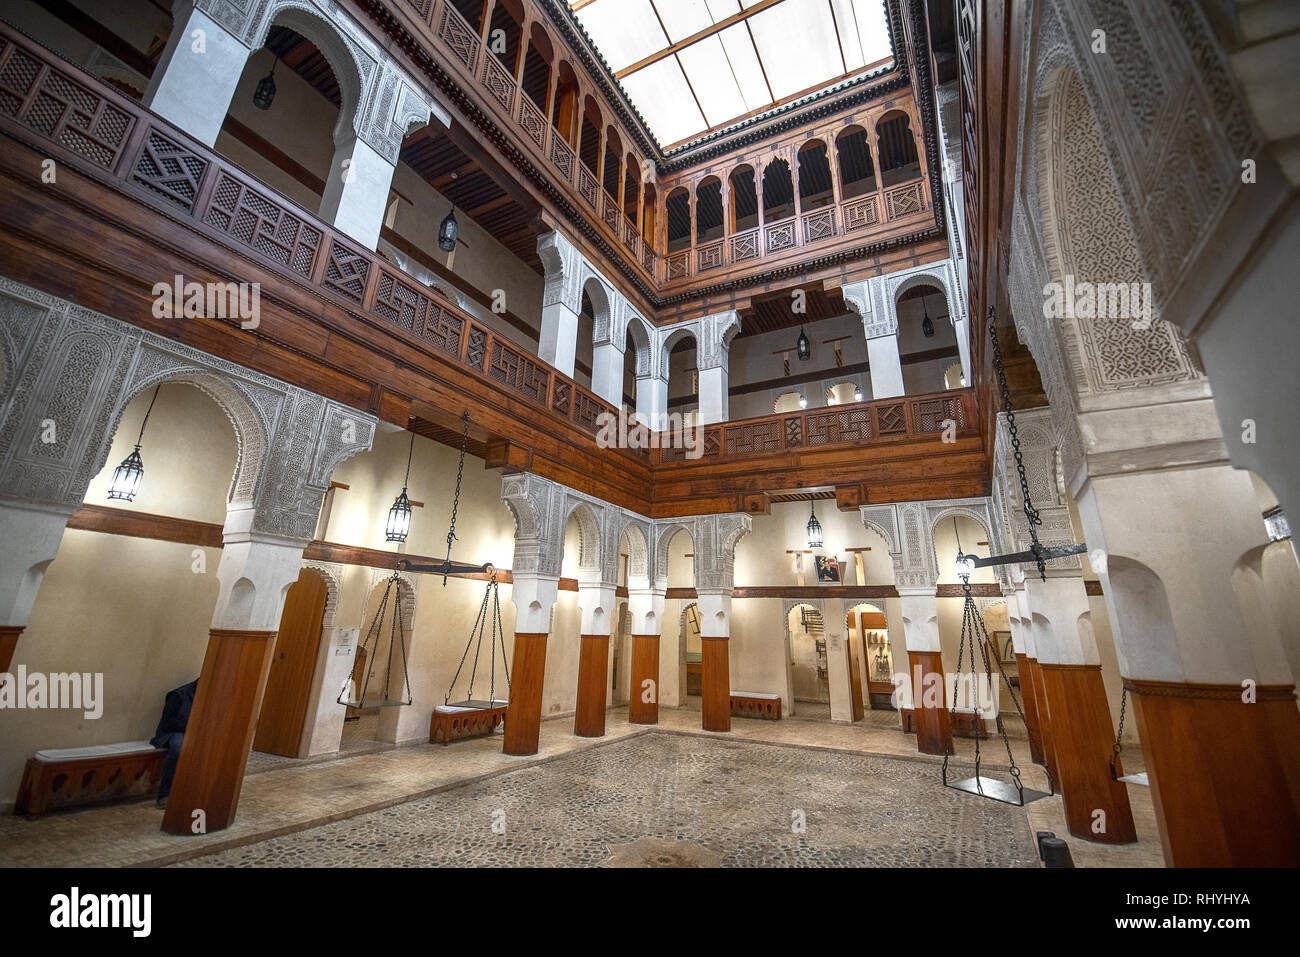 Inside interior of The historic Nejjarine Museum of Wooden Arts and Crafts is in a wonderfully restored funduq in Fes, Morocco Stock Photo